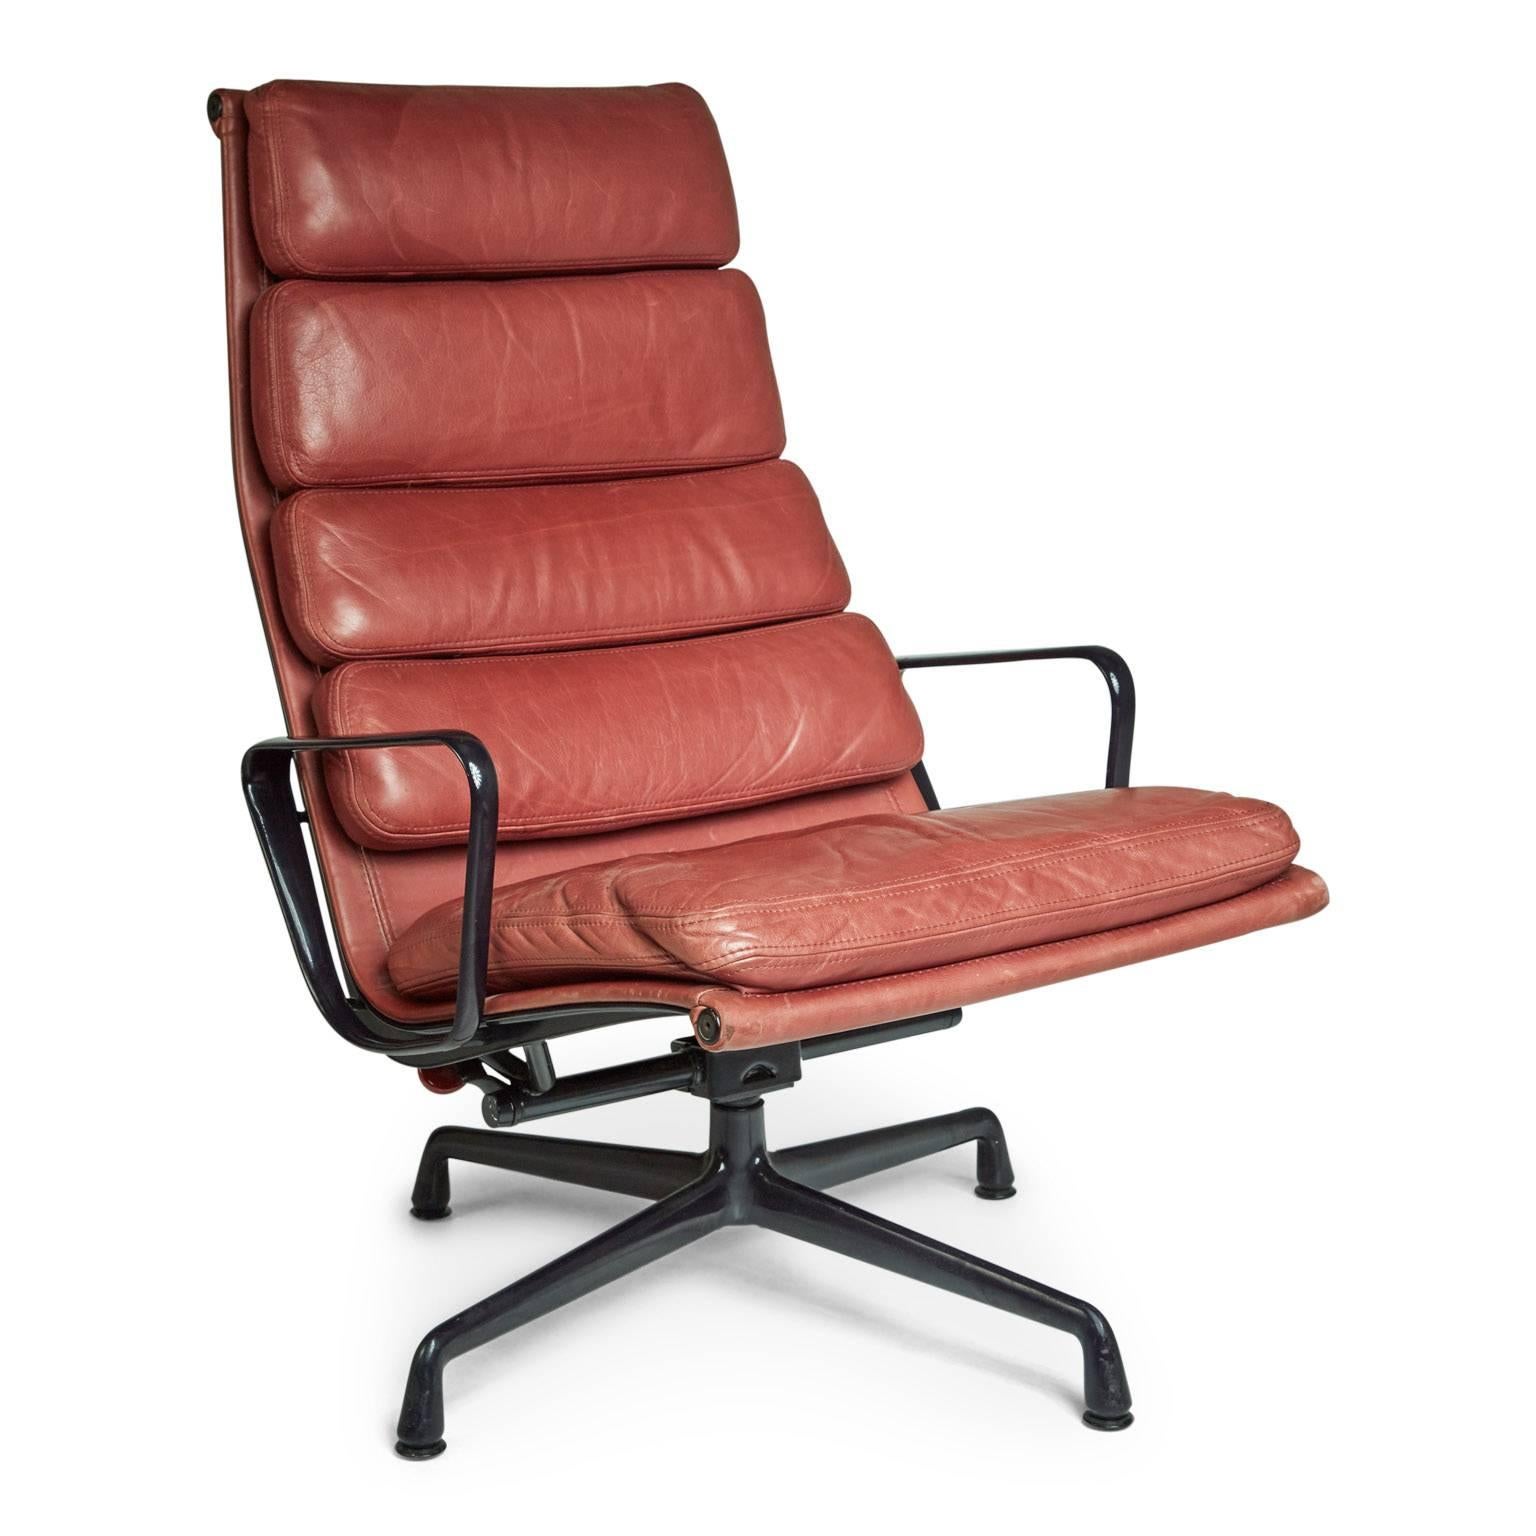 Powder-Coated Soft Pad Management and Executive Desk Chairs by Charles Eames for Herman Miller